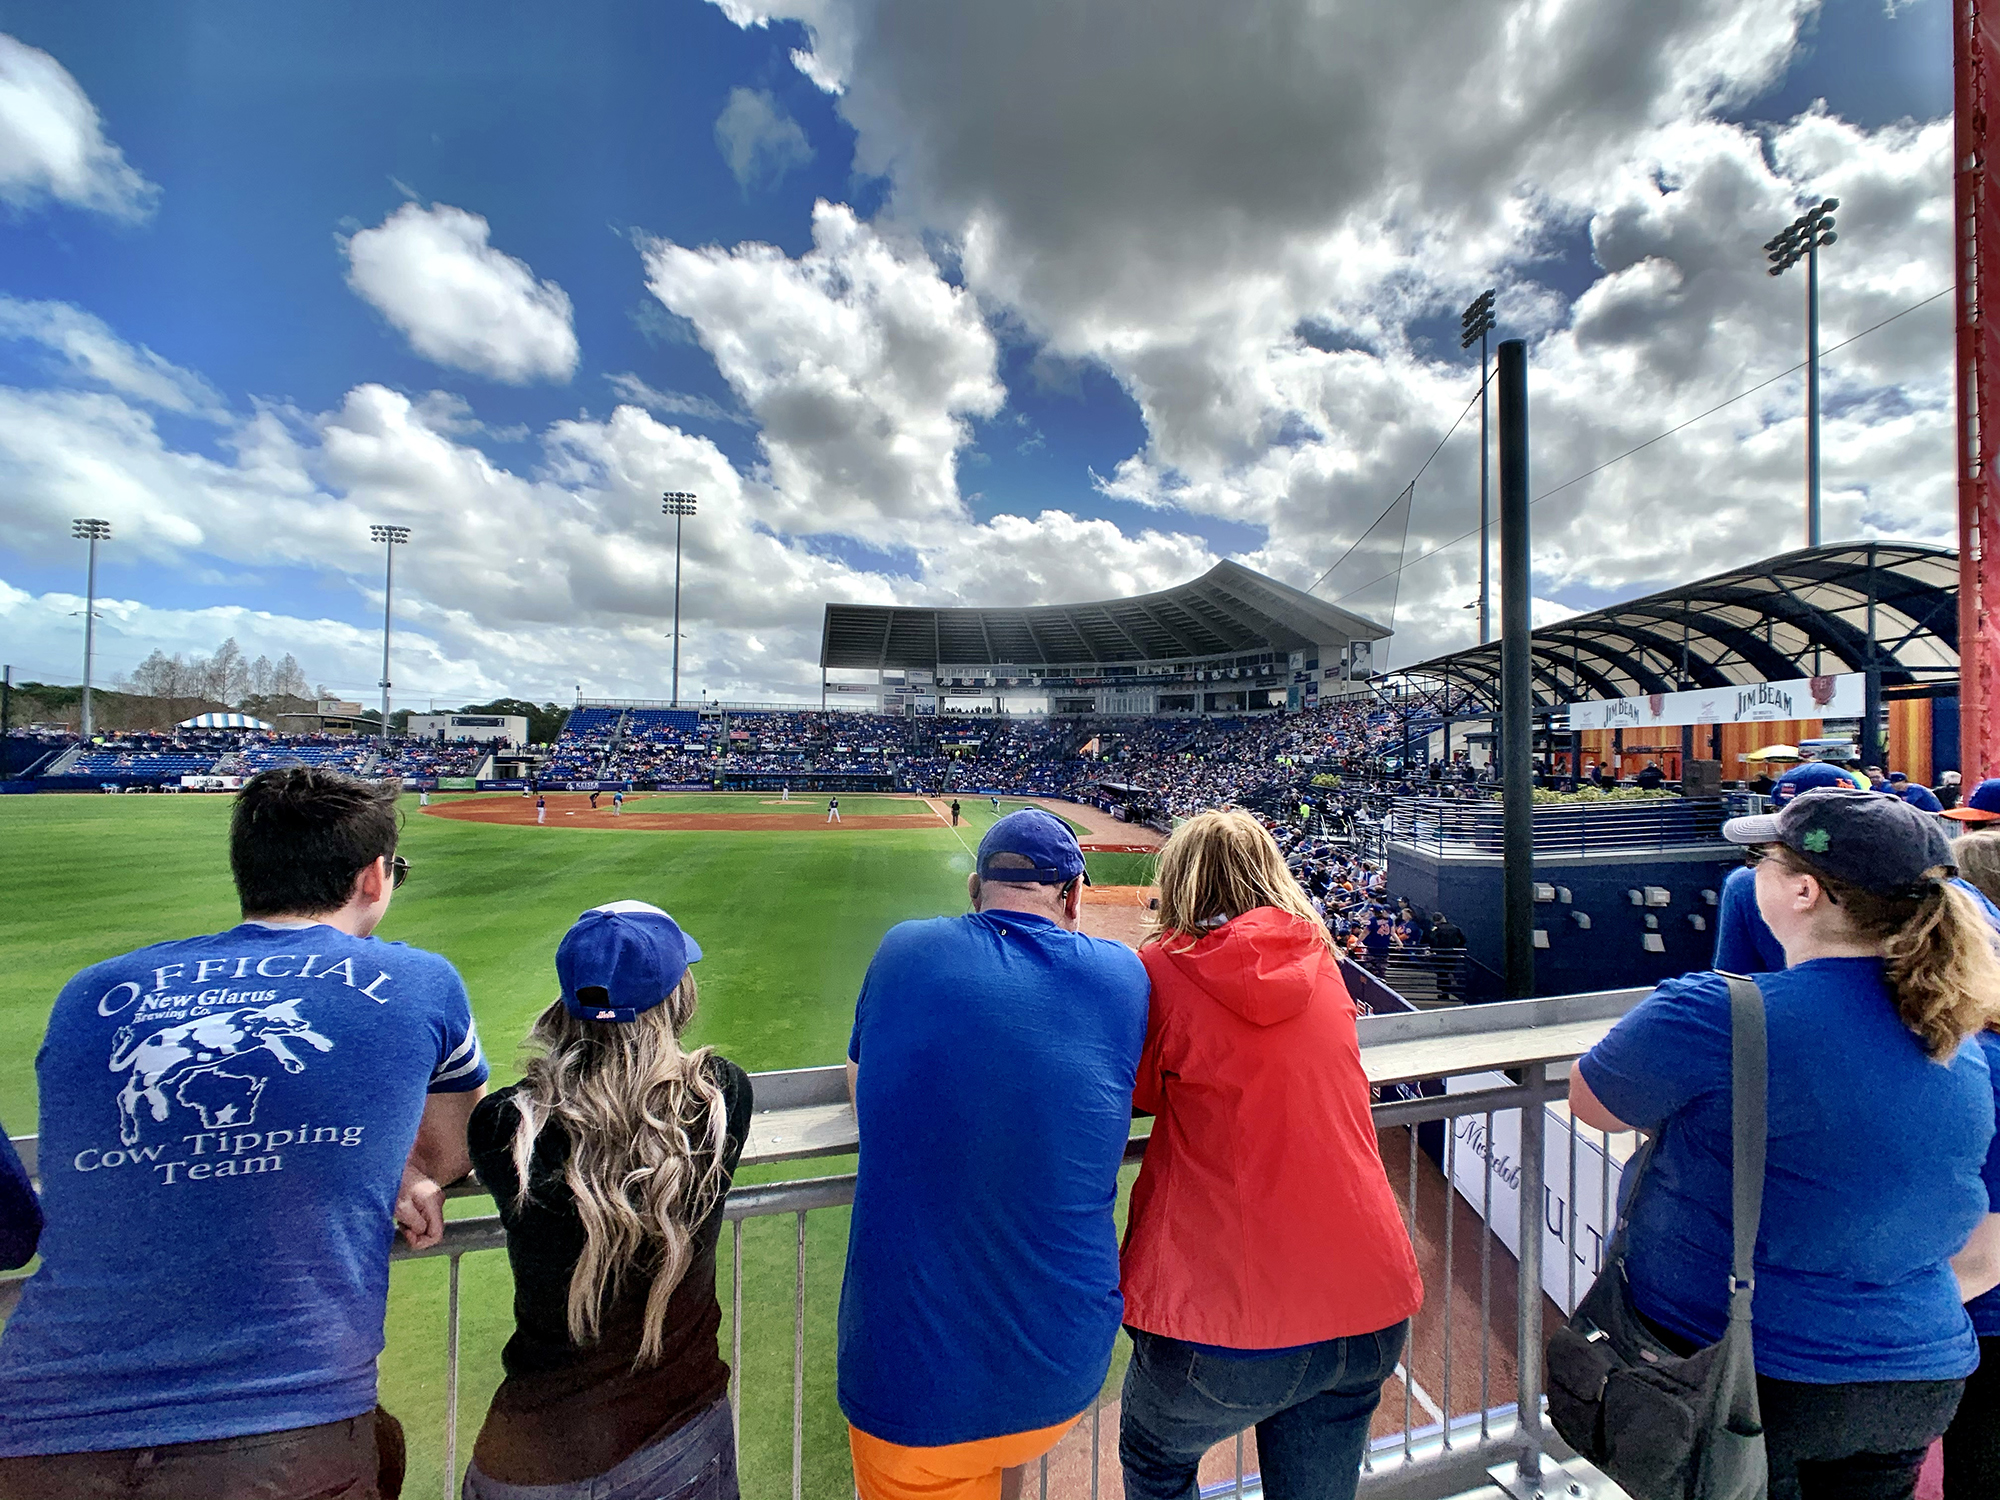 Renovated Mets spring training facility unveiled in Port St. Lucie